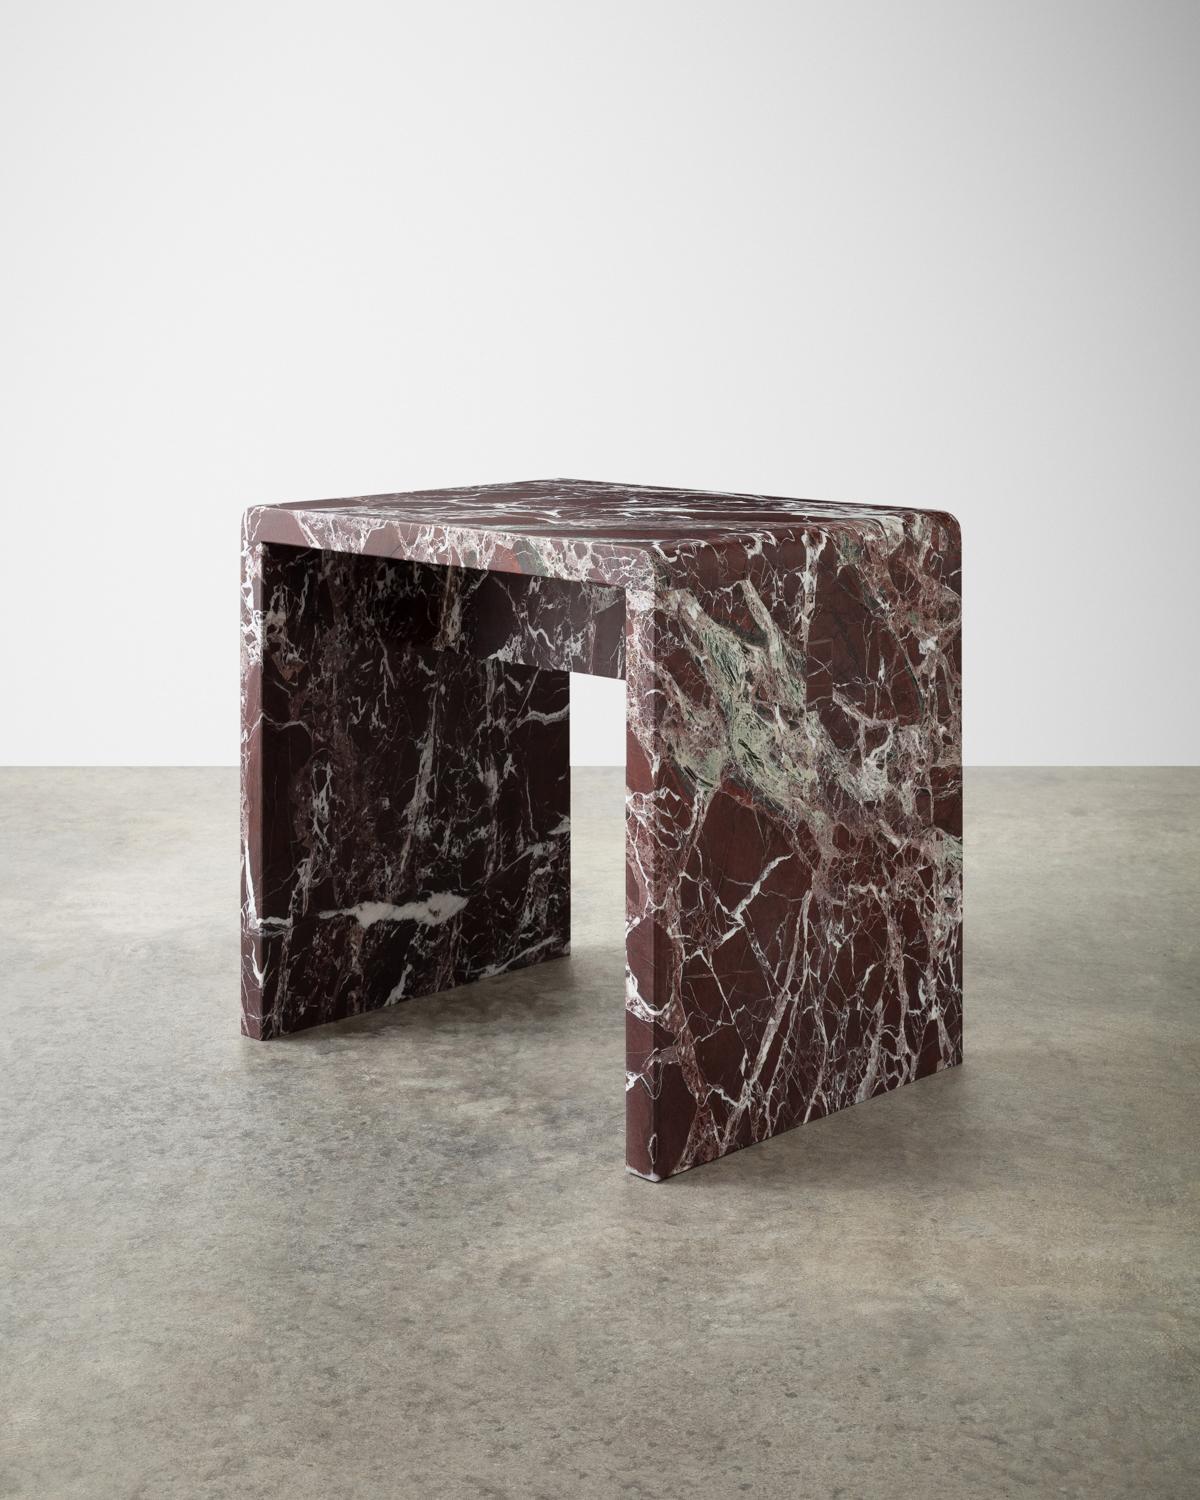 Japanese Jointed Marble Sculptural Stool / Side Table In New Condition For Sale In Union City, NJ